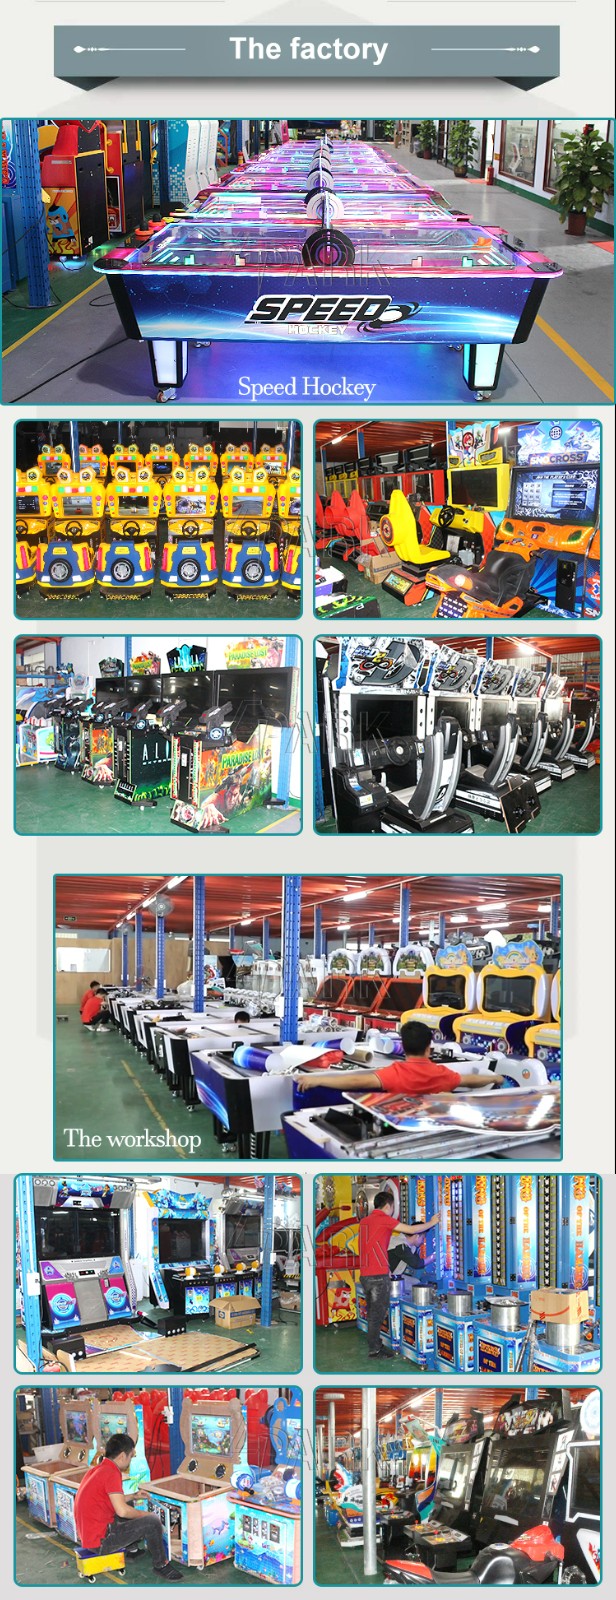 factory Good quality park PU adult High Pressure Compact Laminate compact bowling alley lane machine